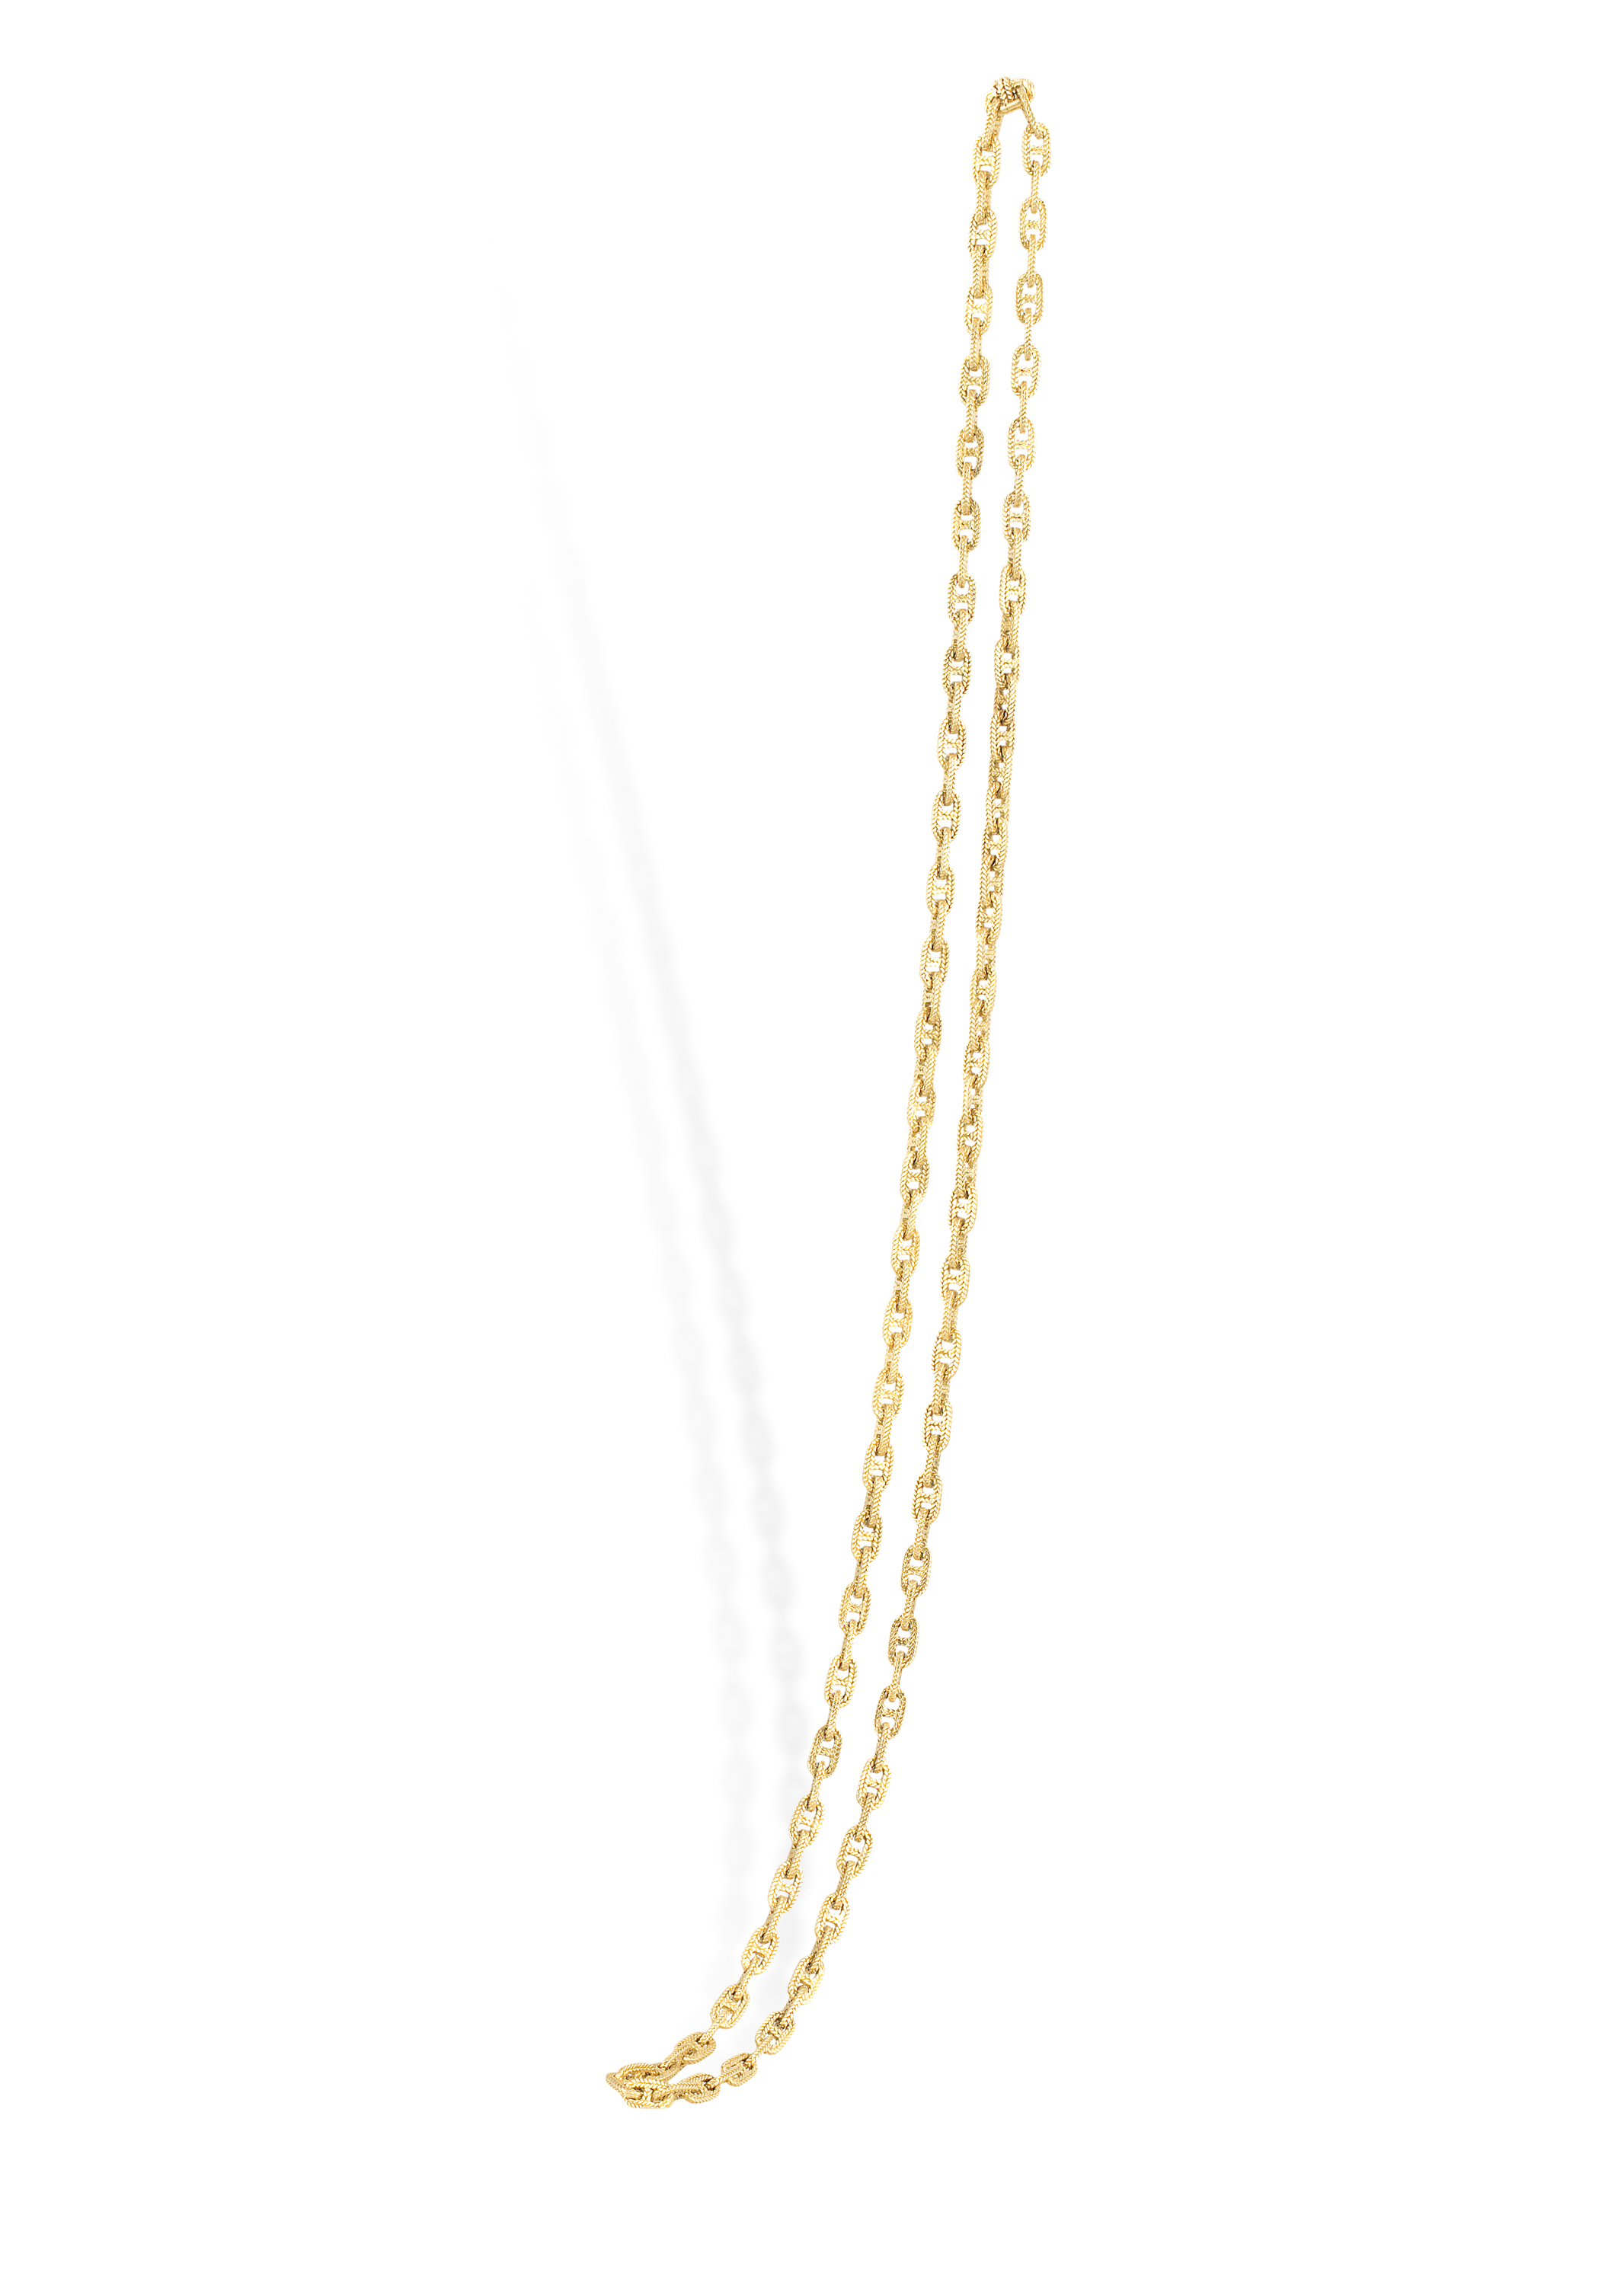 A GOLD CHAIN NECKLACE, BY HERMES, CIRCA 1965Of anchor link design with ropetwist details, in 18K